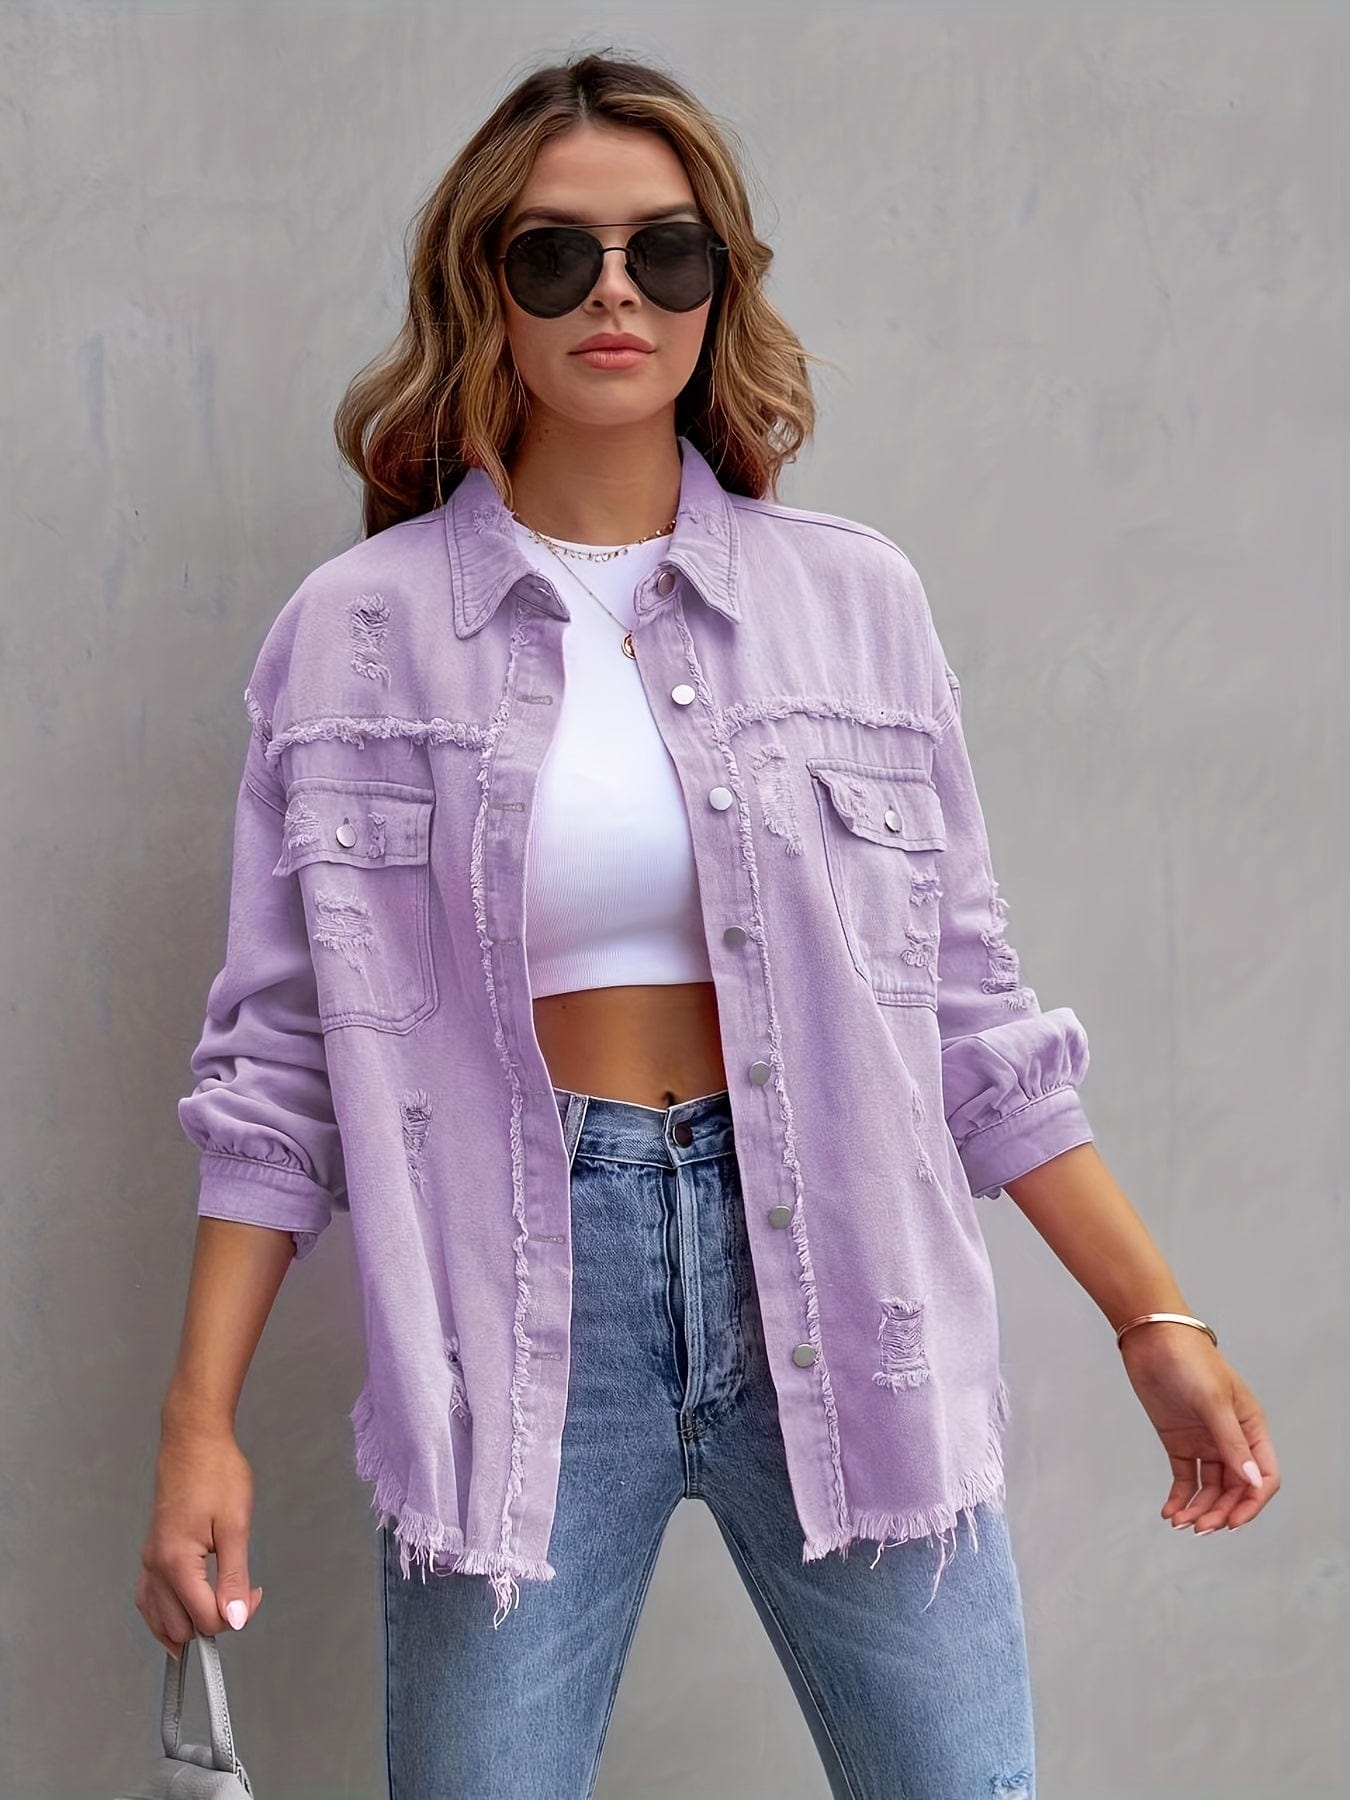 Ripped Raw Edge Distressed Collar Single-Breasted Button-Up Long Sleeve Denim Jacket PLU23092626VLTS(4) Violet / S(4)